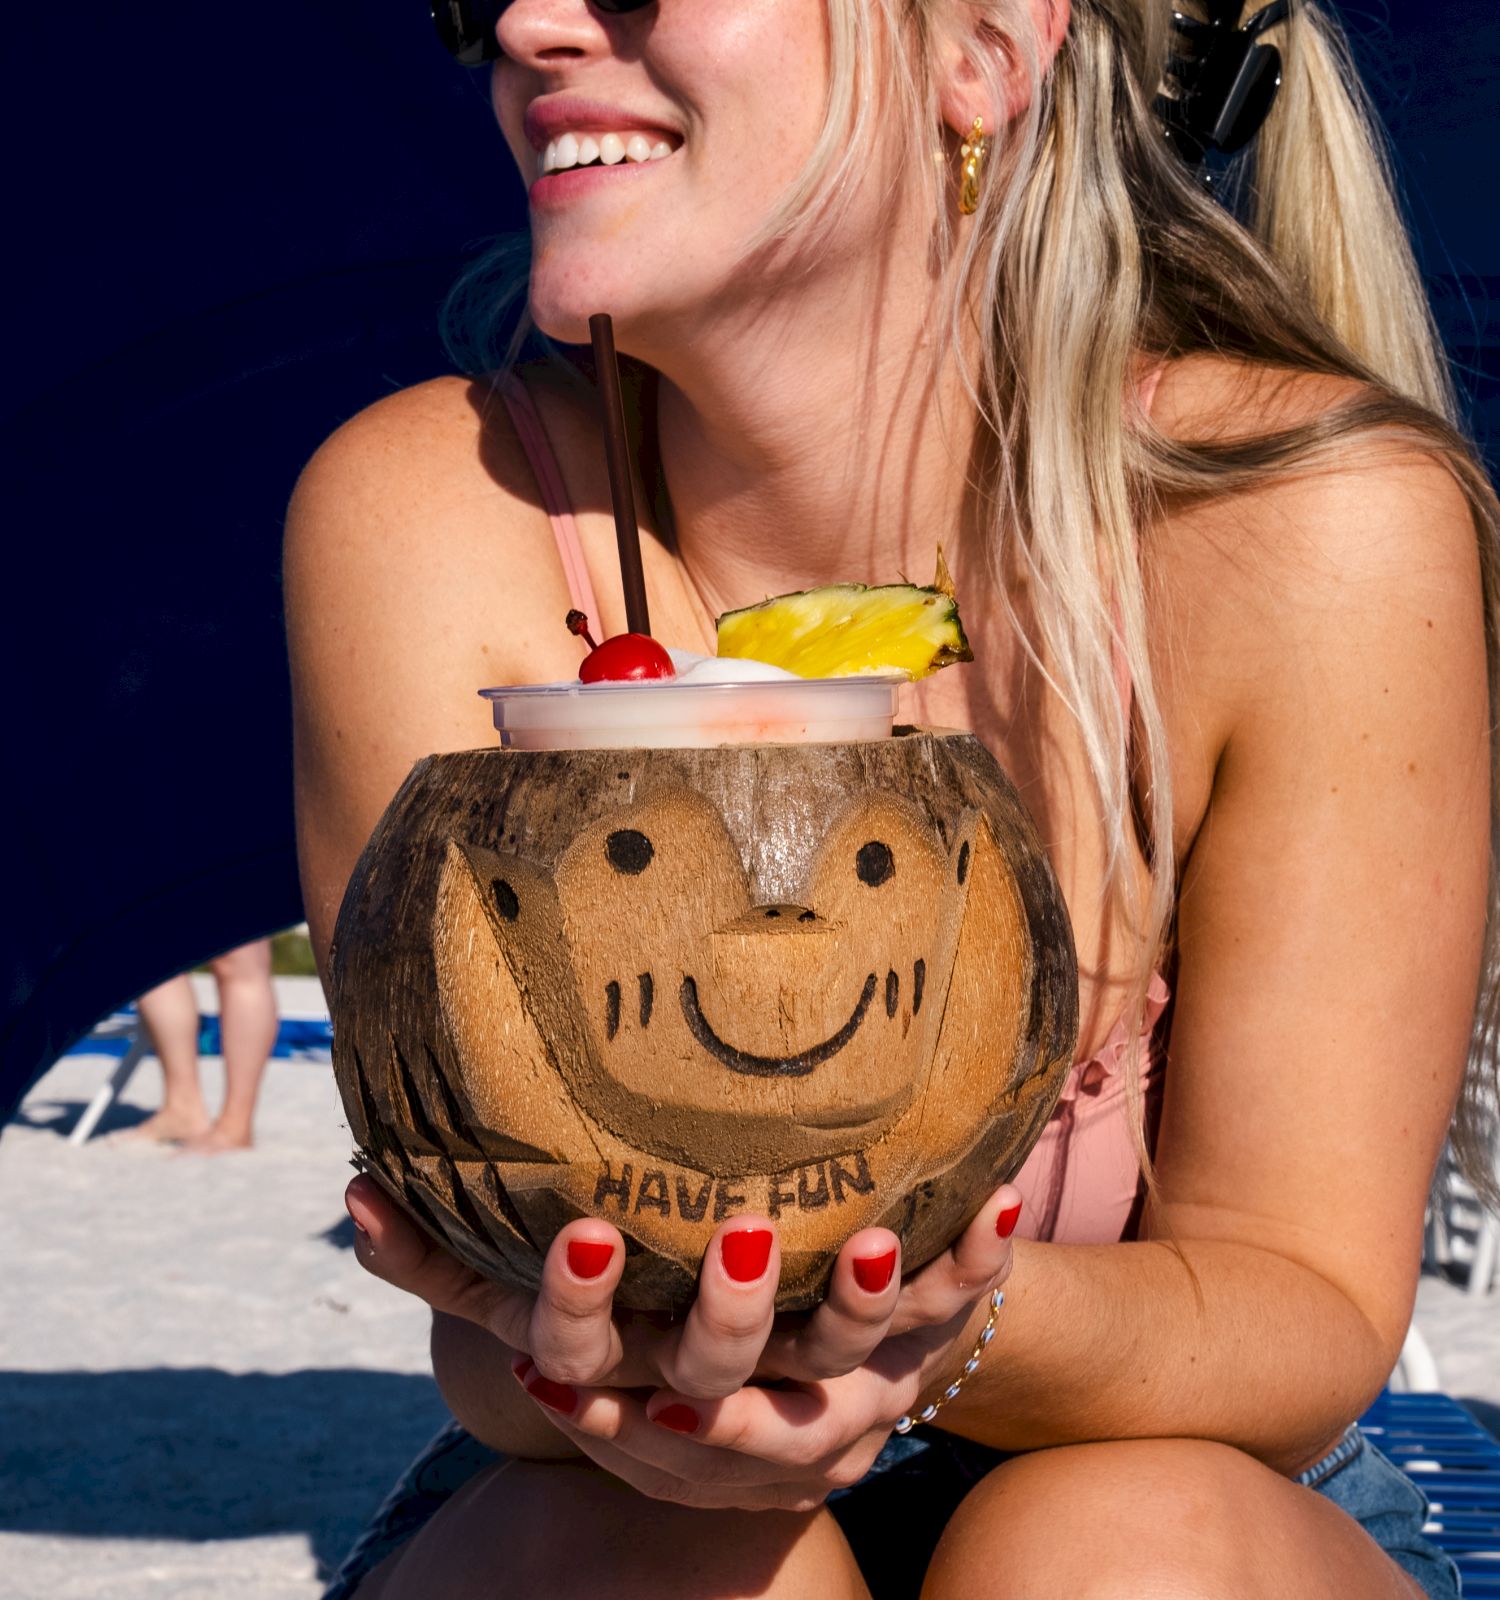 A person is holding a coconut with a smiley face, sitting at a sunny beach.